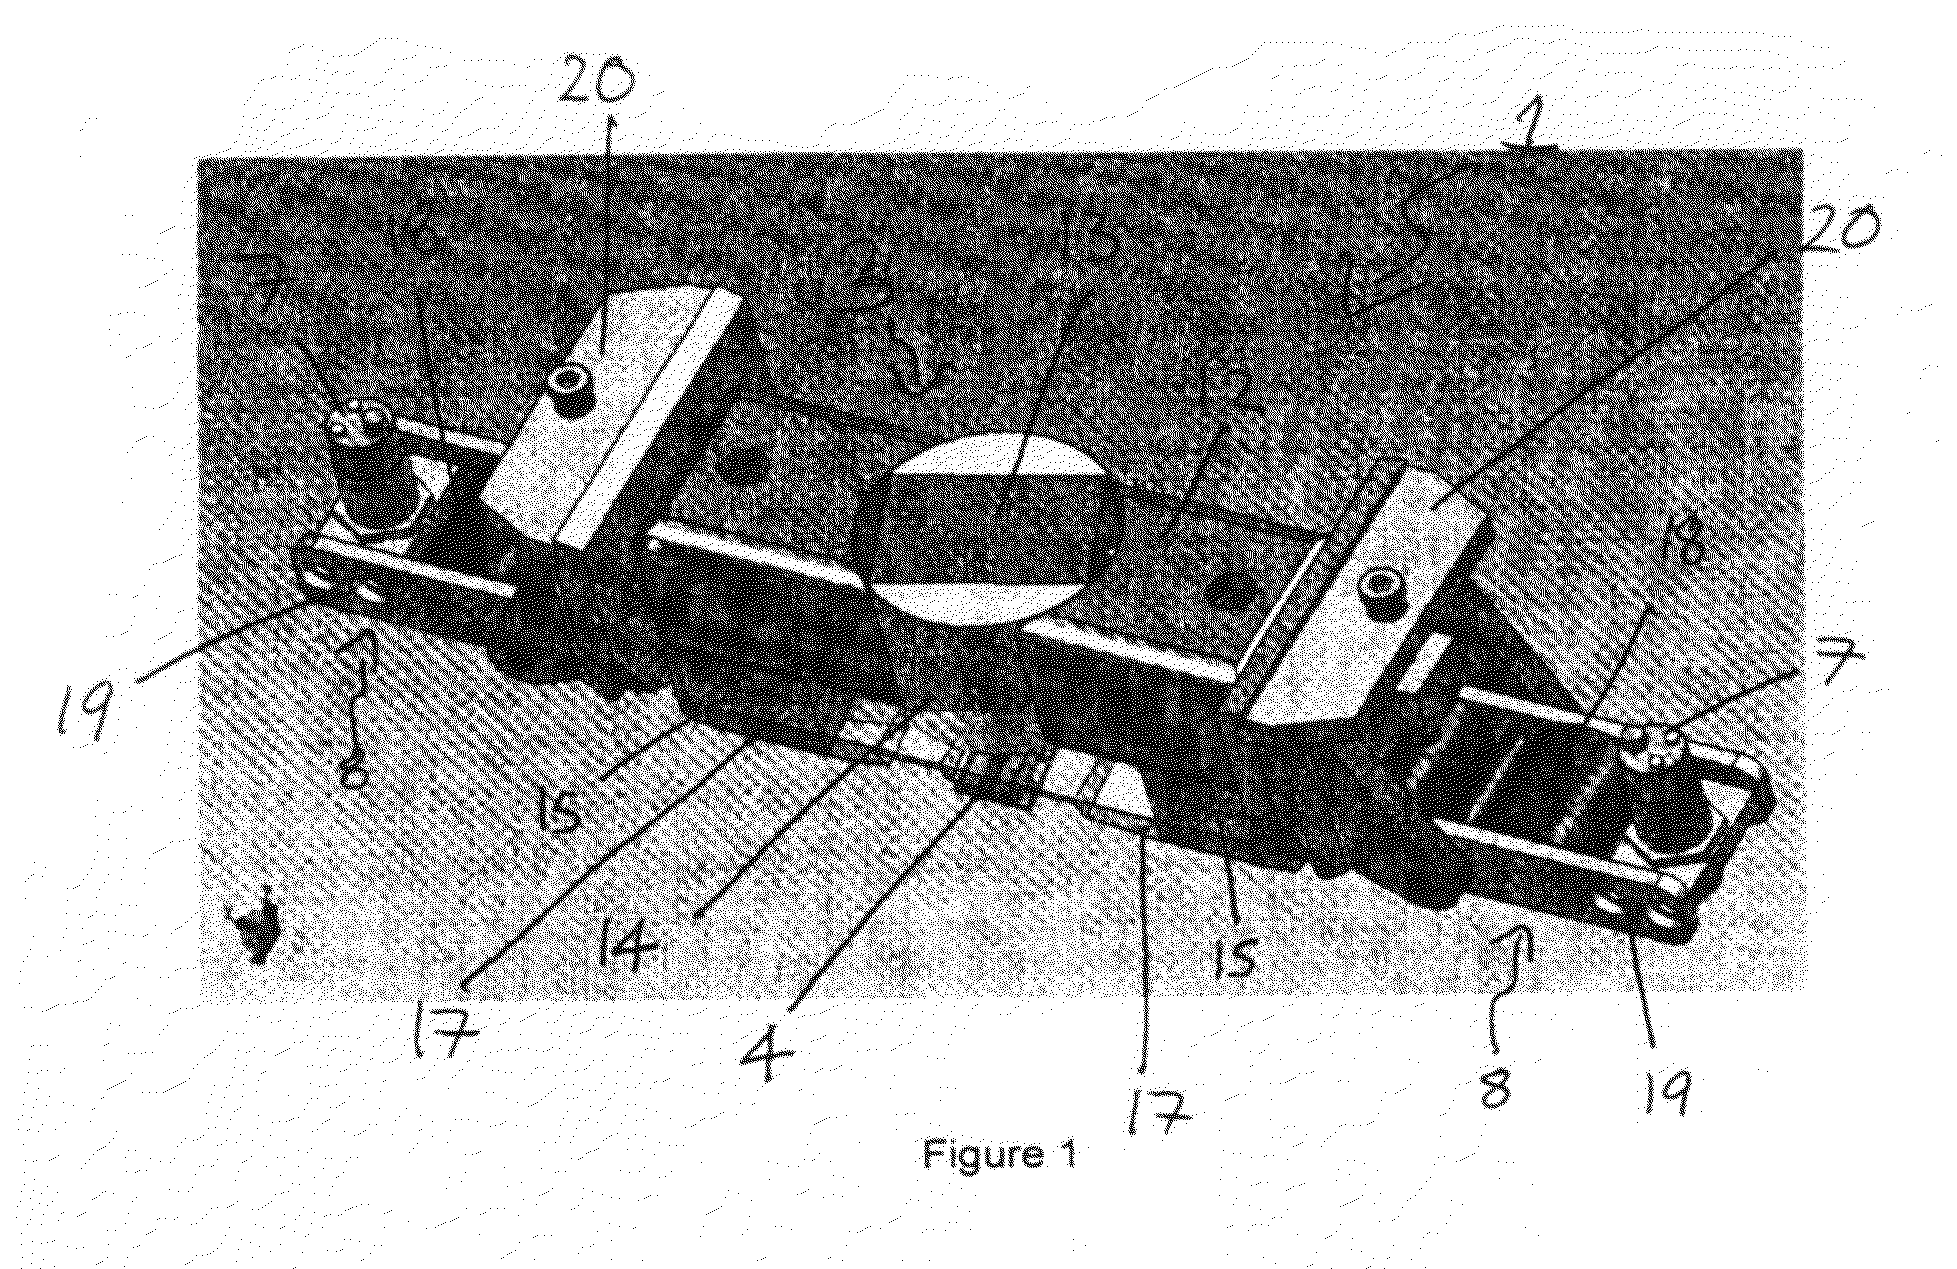 Electromagnet inspection apparatus and method